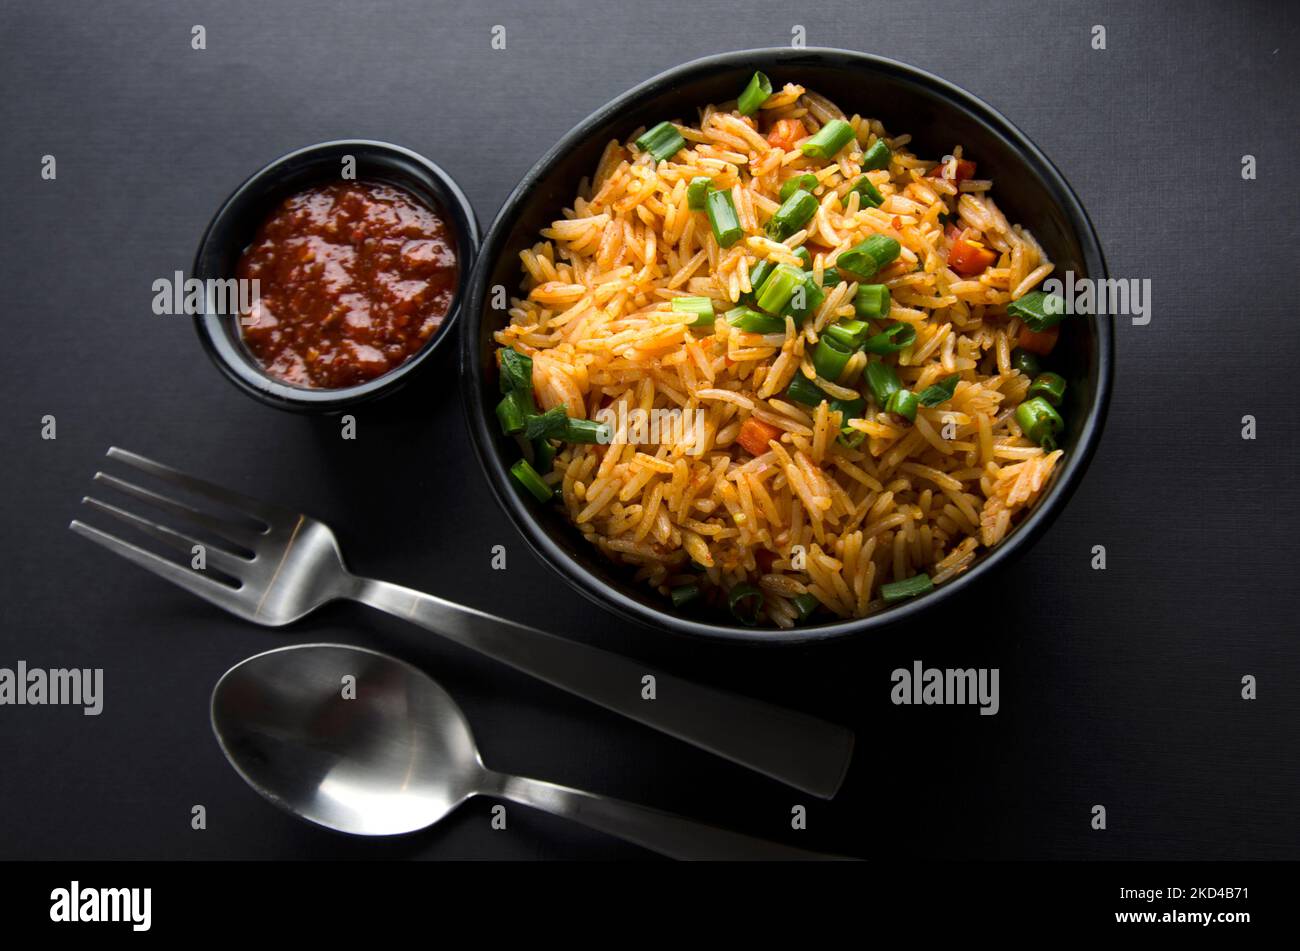 close up of Chinese style shrimp Schezwan noodles, vegetable Hakka Noodles or chow mein is a popular Indo-Chinese recipes. Stock Photo